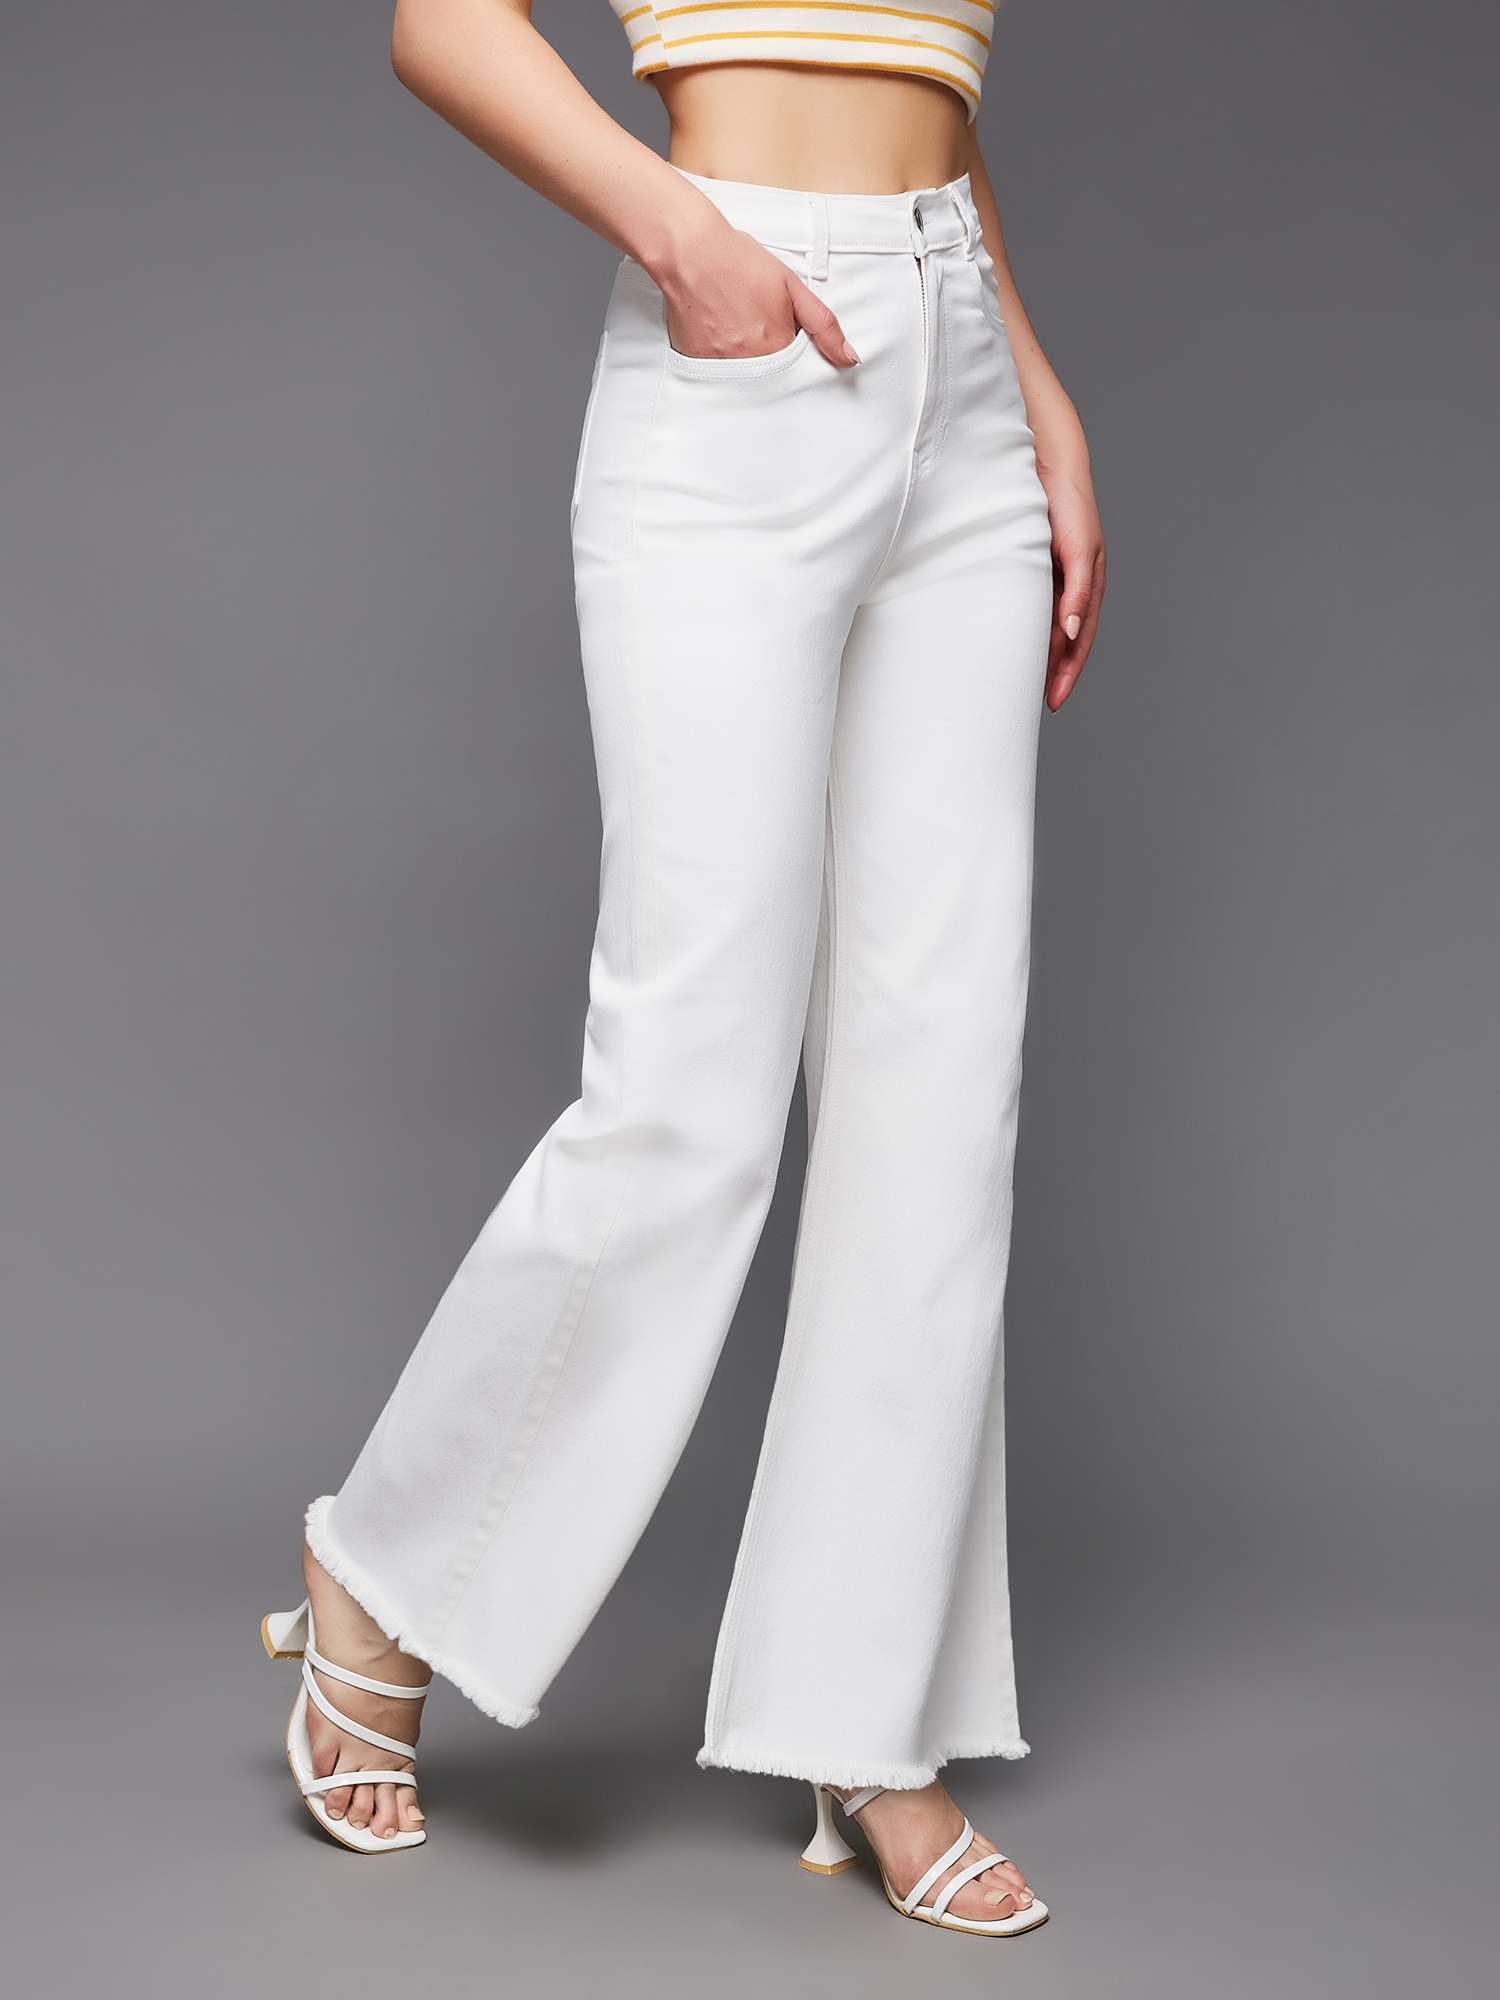 MISS CHASE | Women's White Solid Bootcut Jeans 2